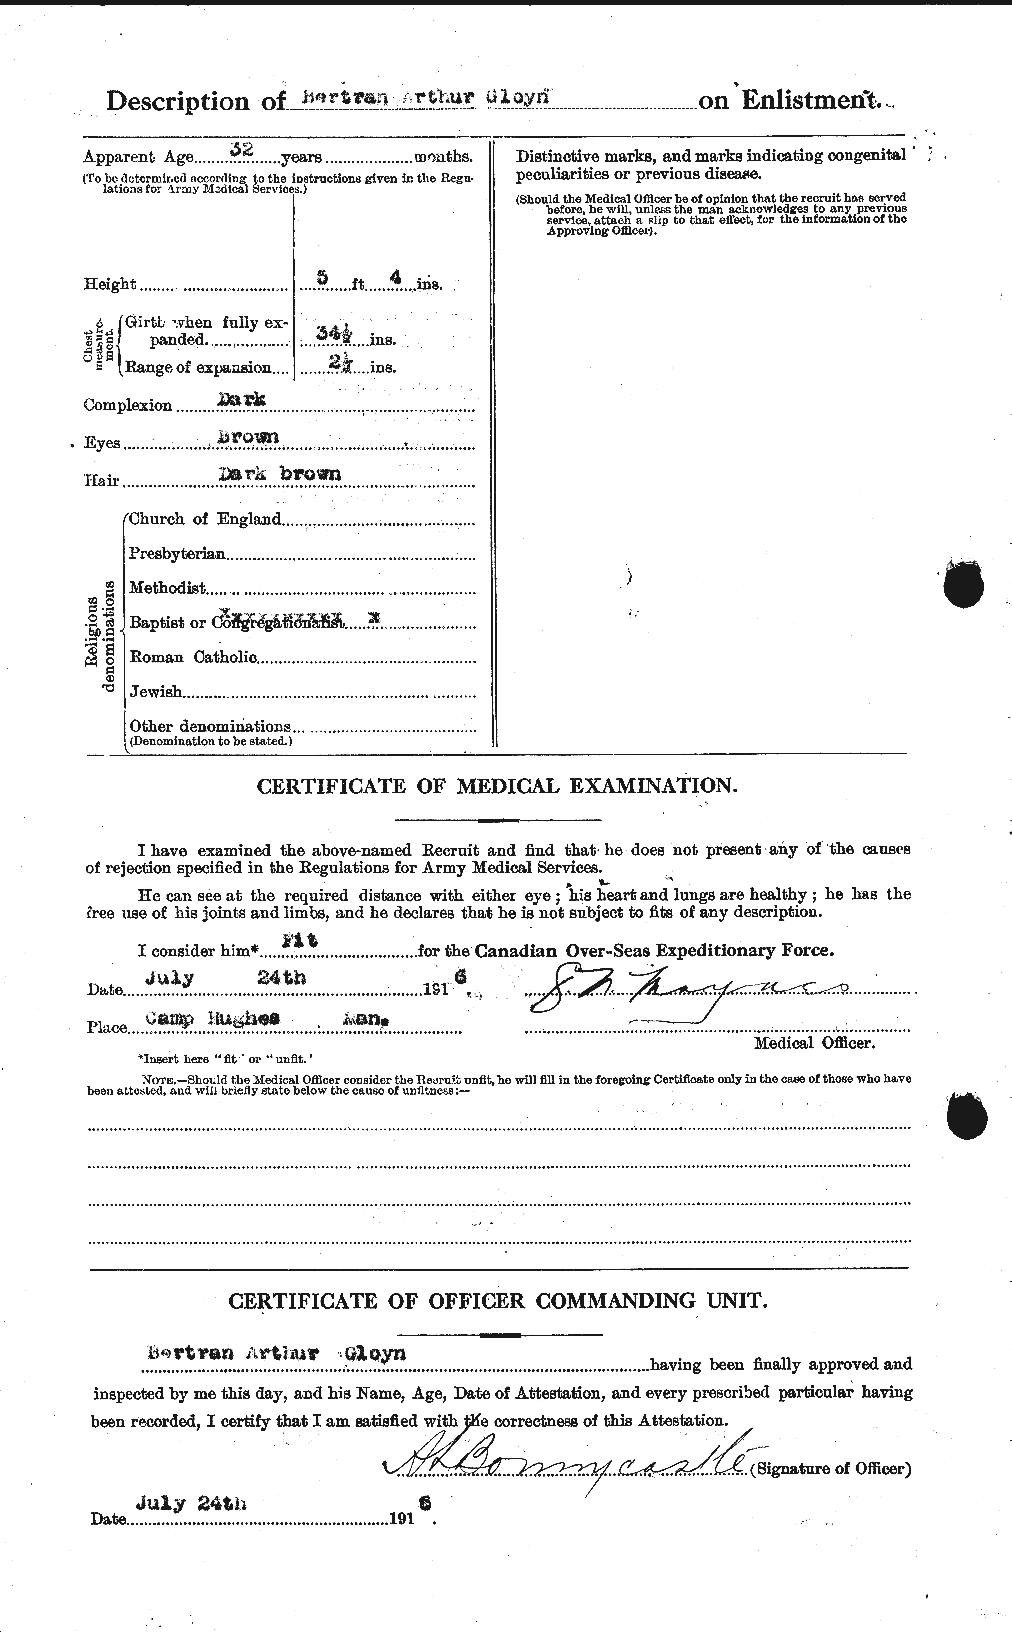 Personnel Records of the First World War - CEF 350747b